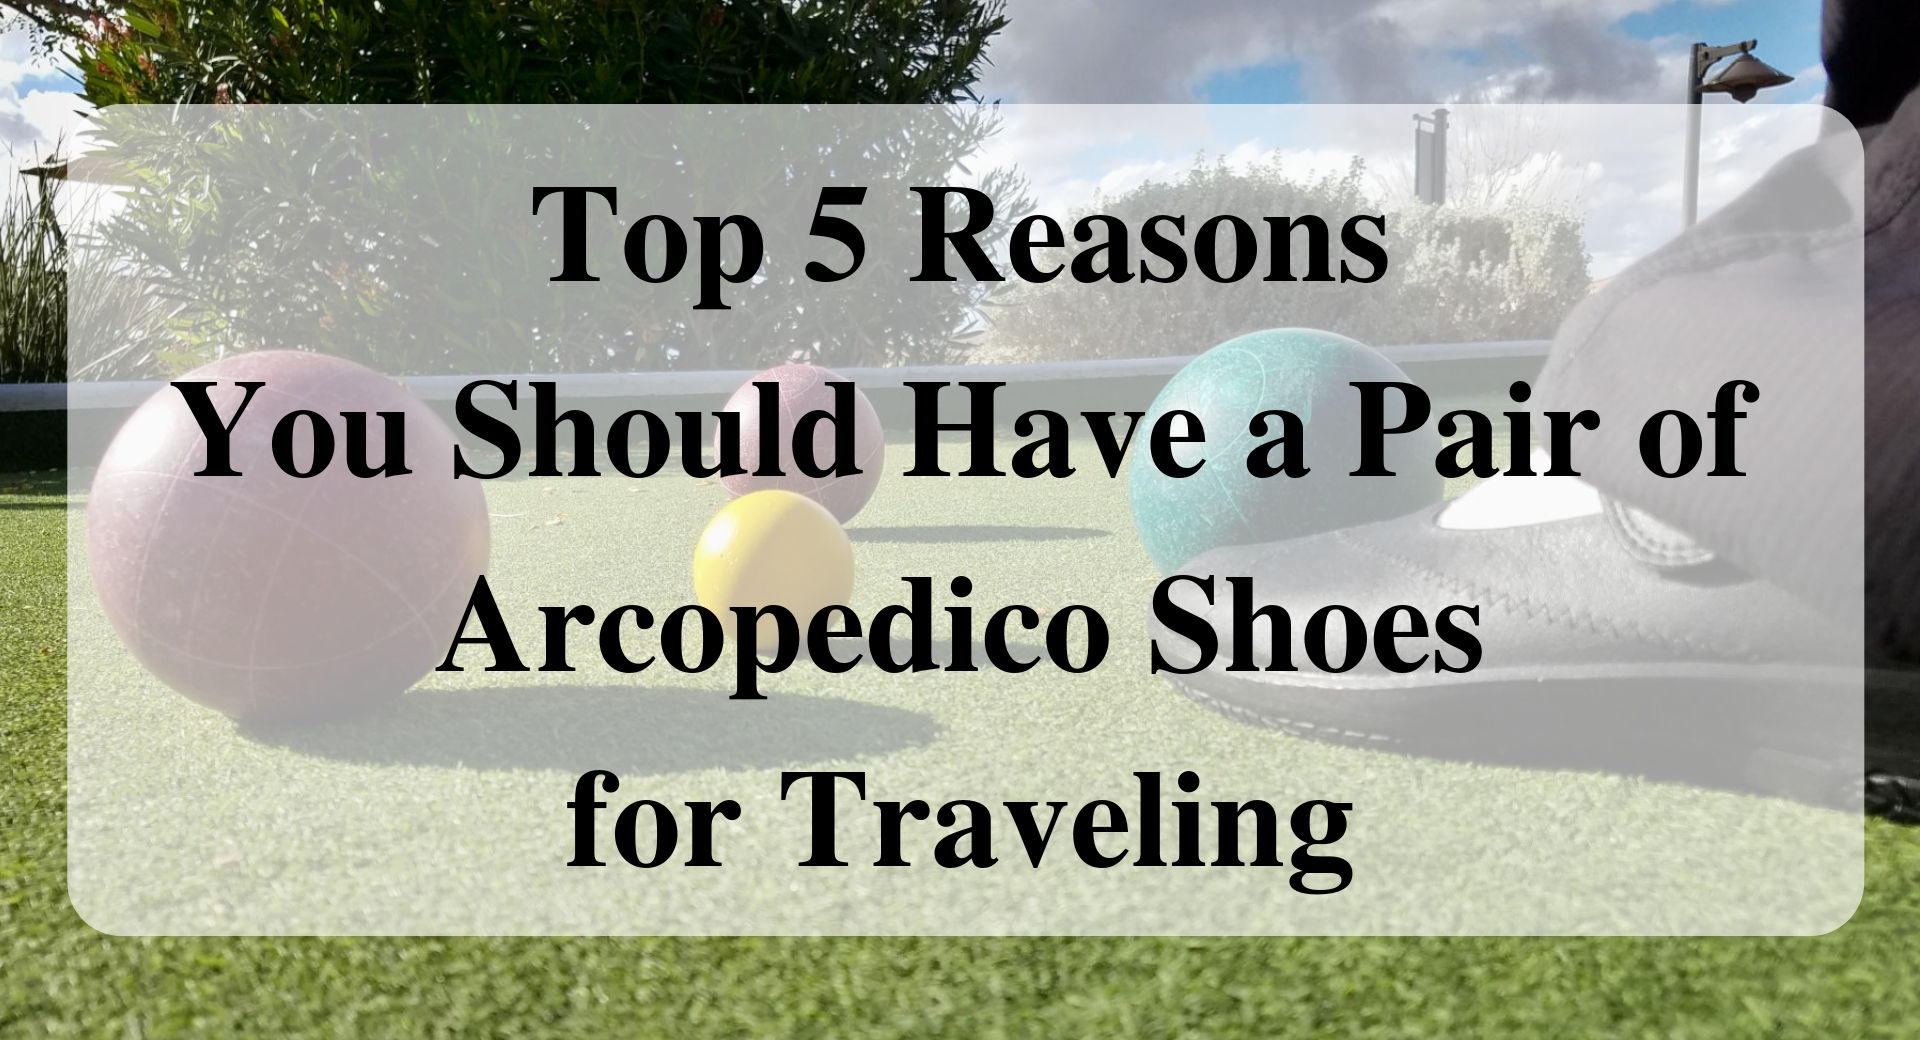 Top 5 Reasons You Should Have a Pair of Arcopedico Shoes for Traveling